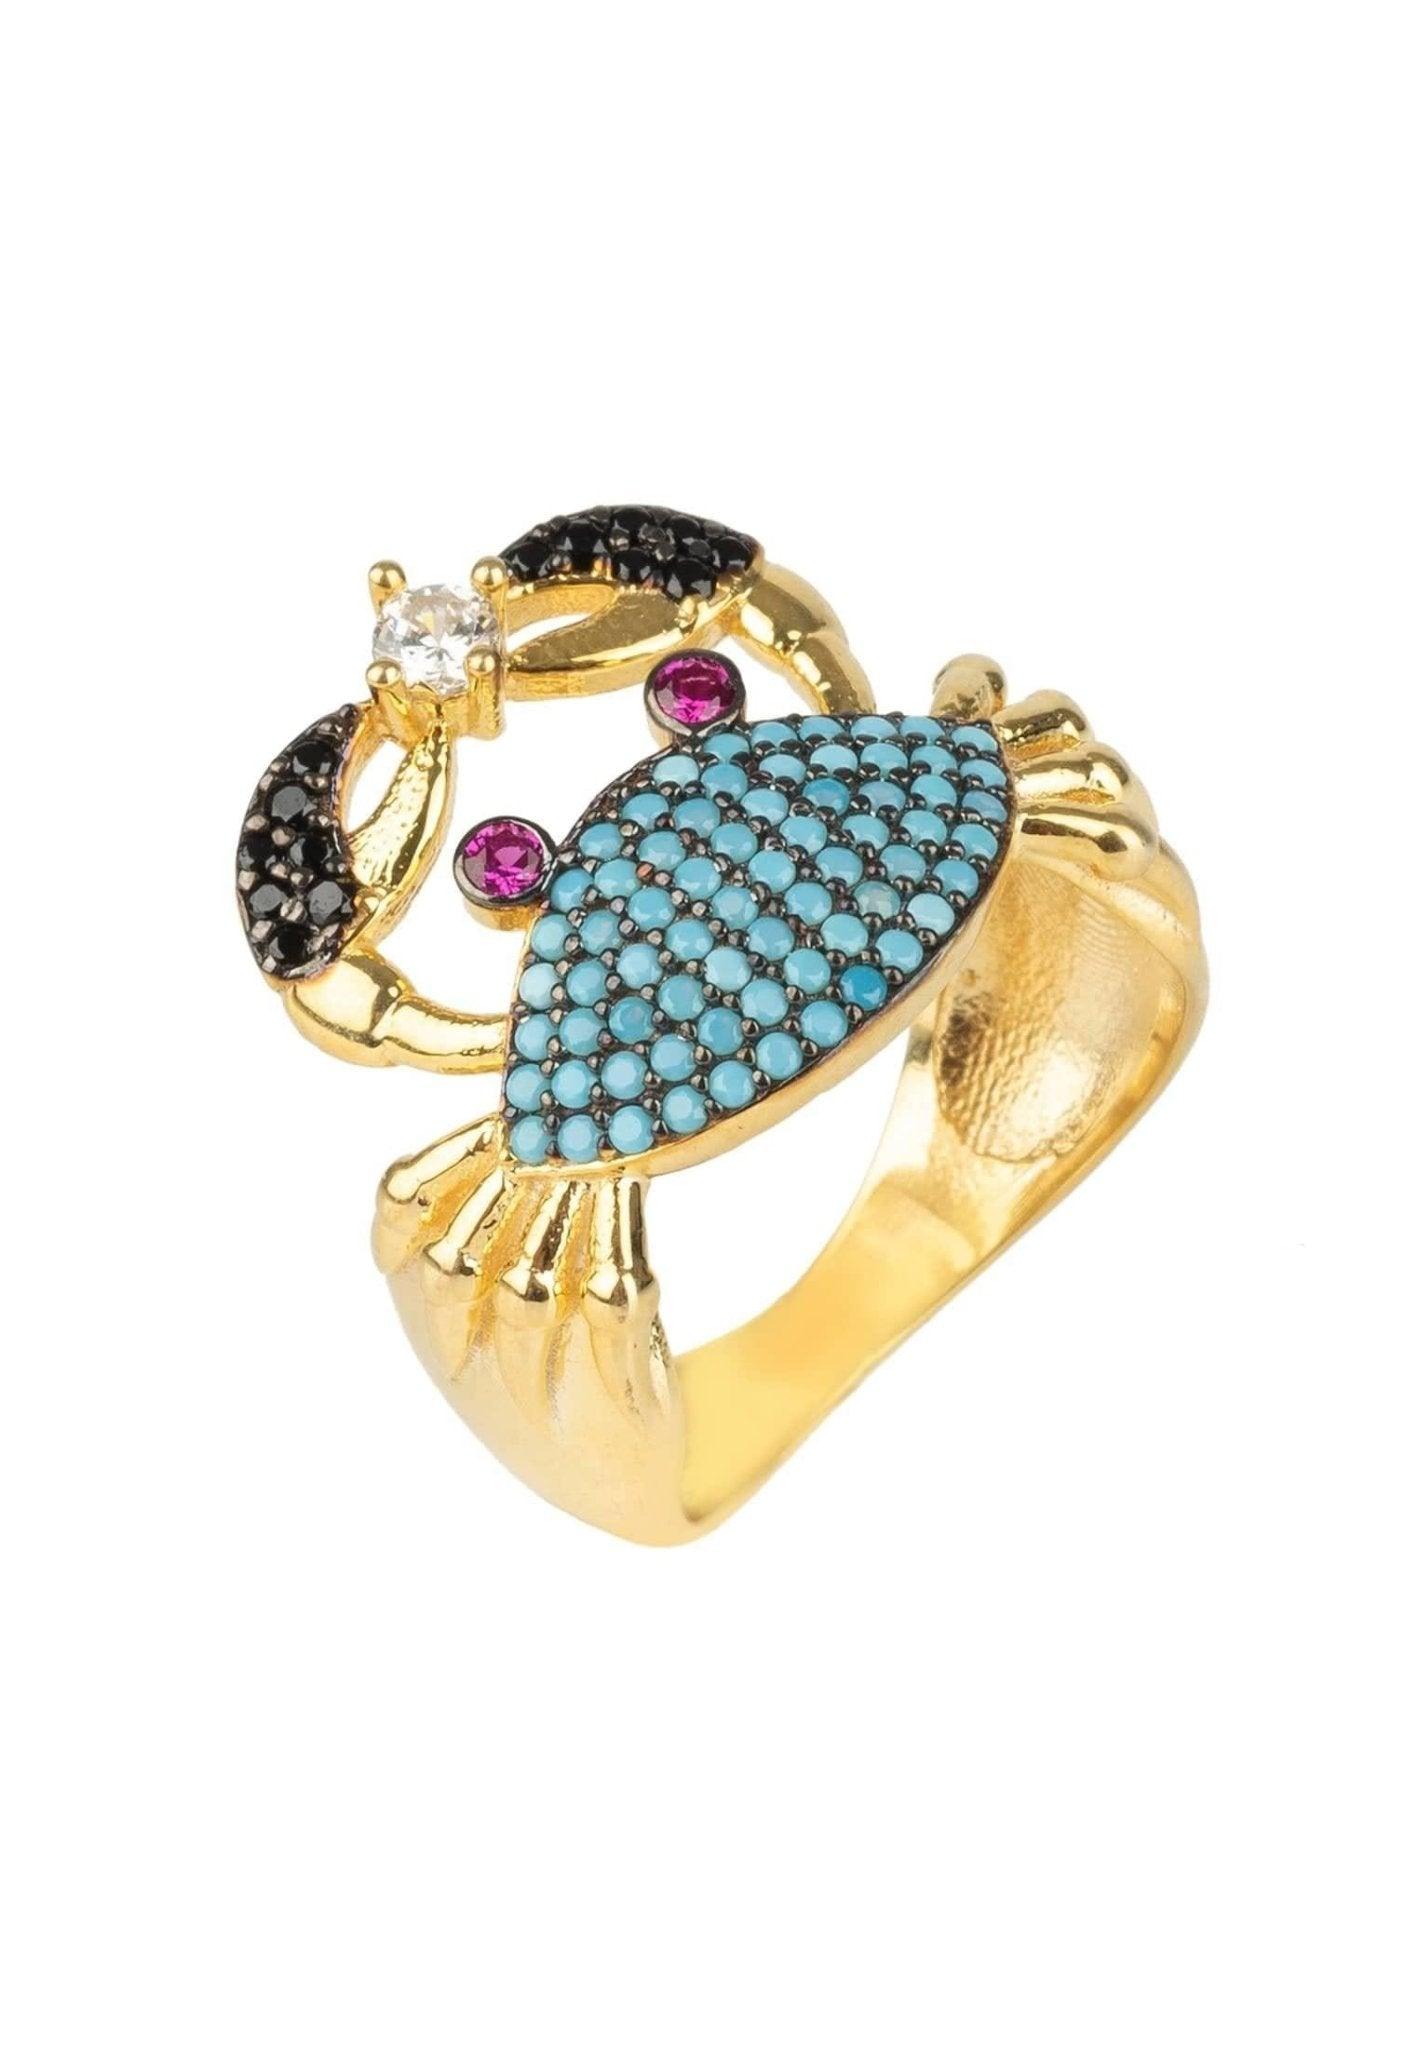 Crab Cocktail Ring Blue Turquoise Zirconia, Gold Plate